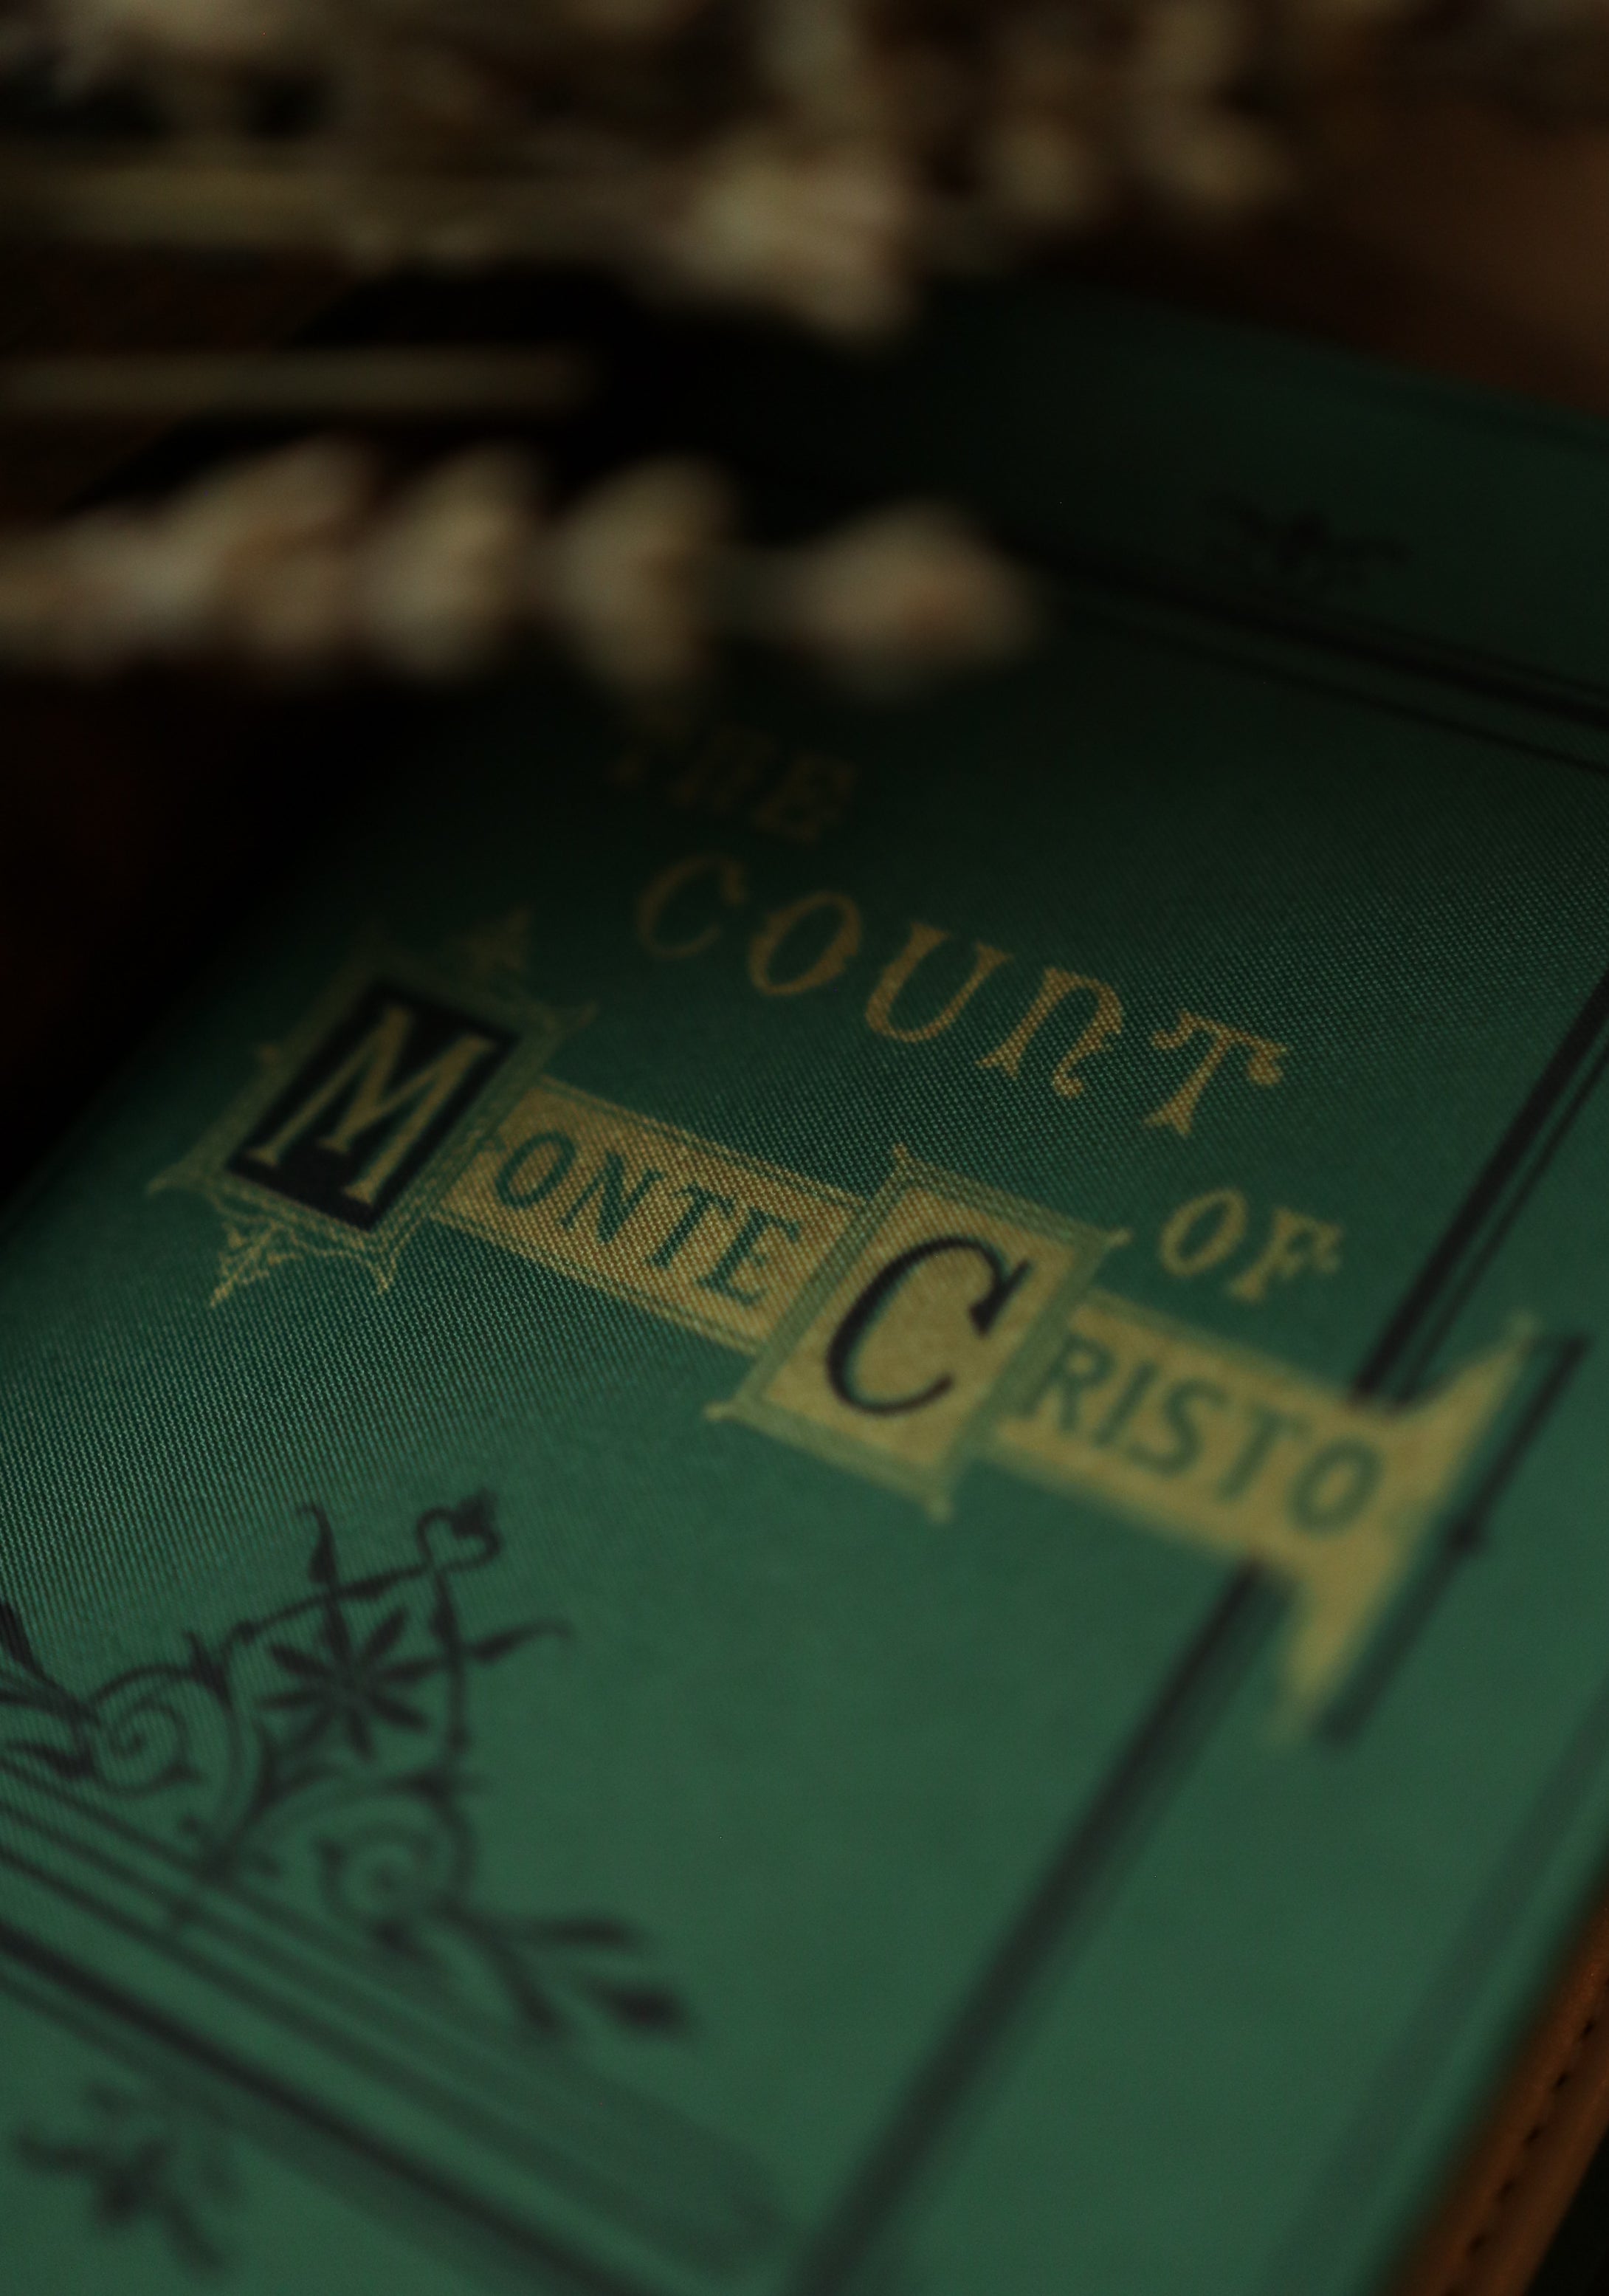 (Emerald) The Count of Monte Cristo by Alexandre Dumas 1844 Book Wallet